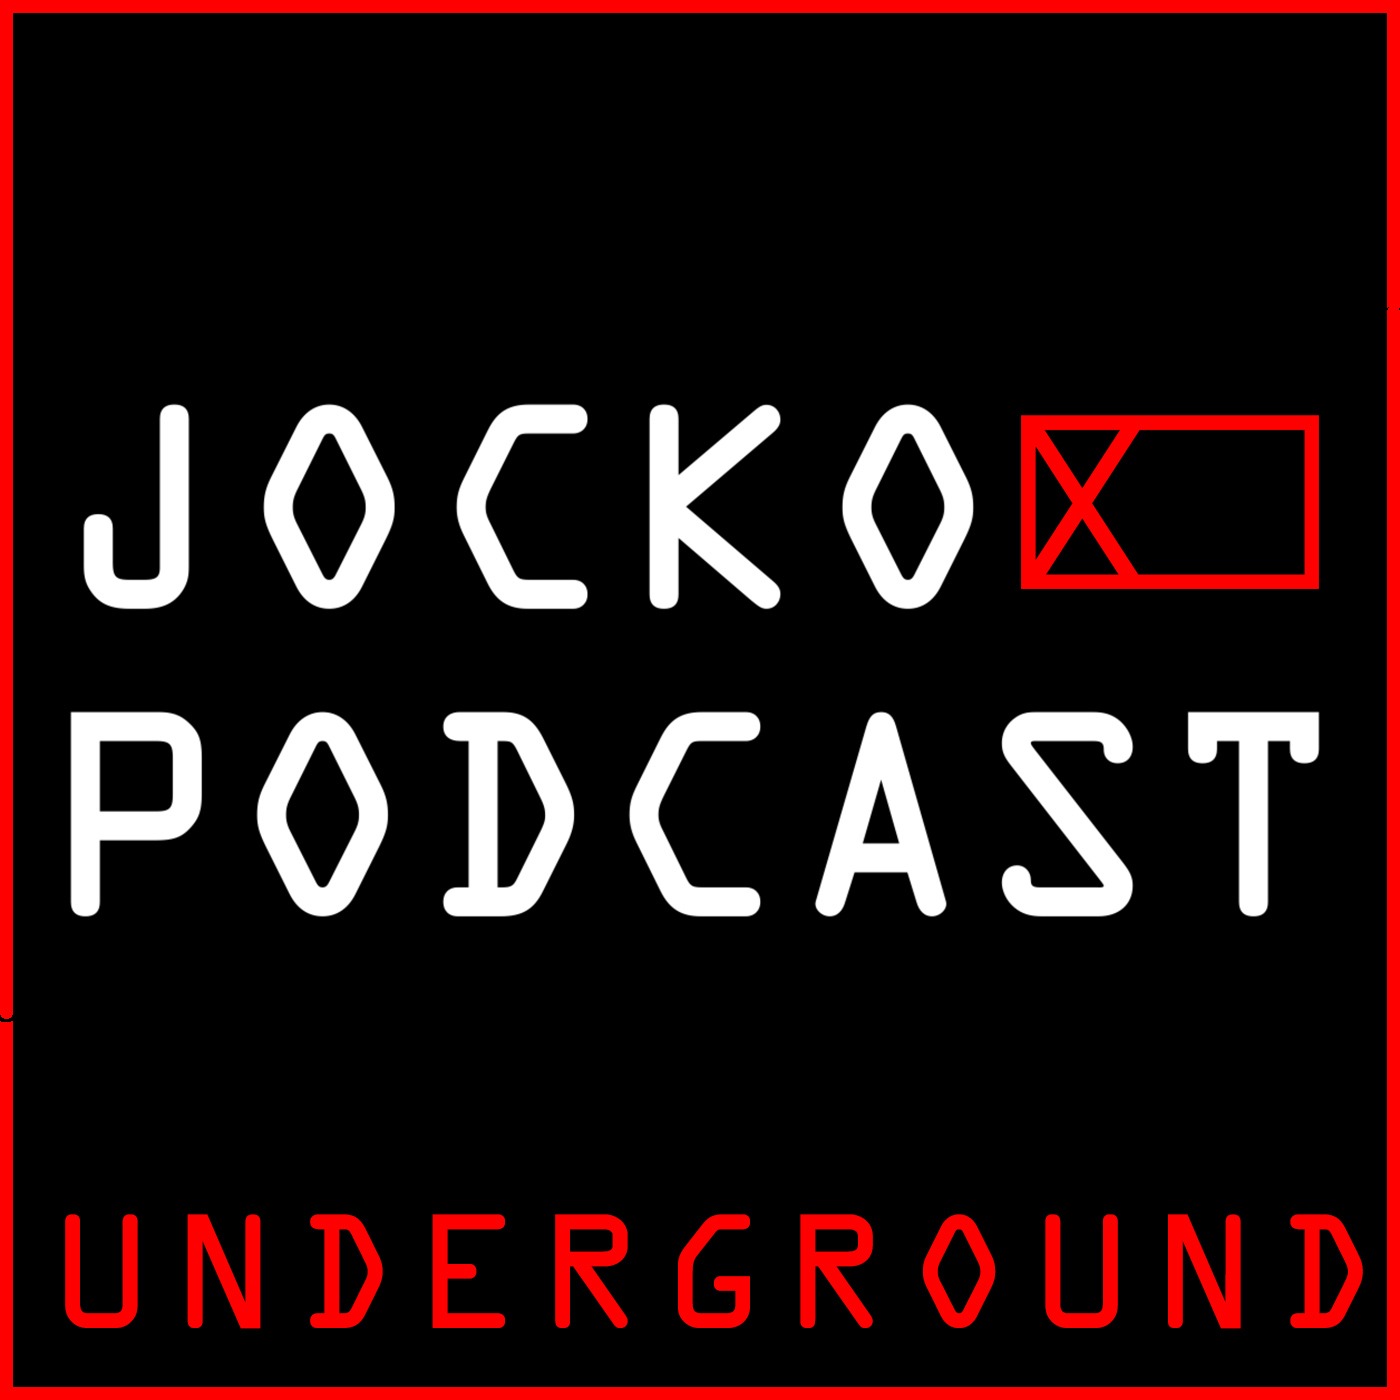 Jocko Underground: Taking Pleasure in Other Peoples Pain | Guys Looking to Start Trouble Everywhere You Go